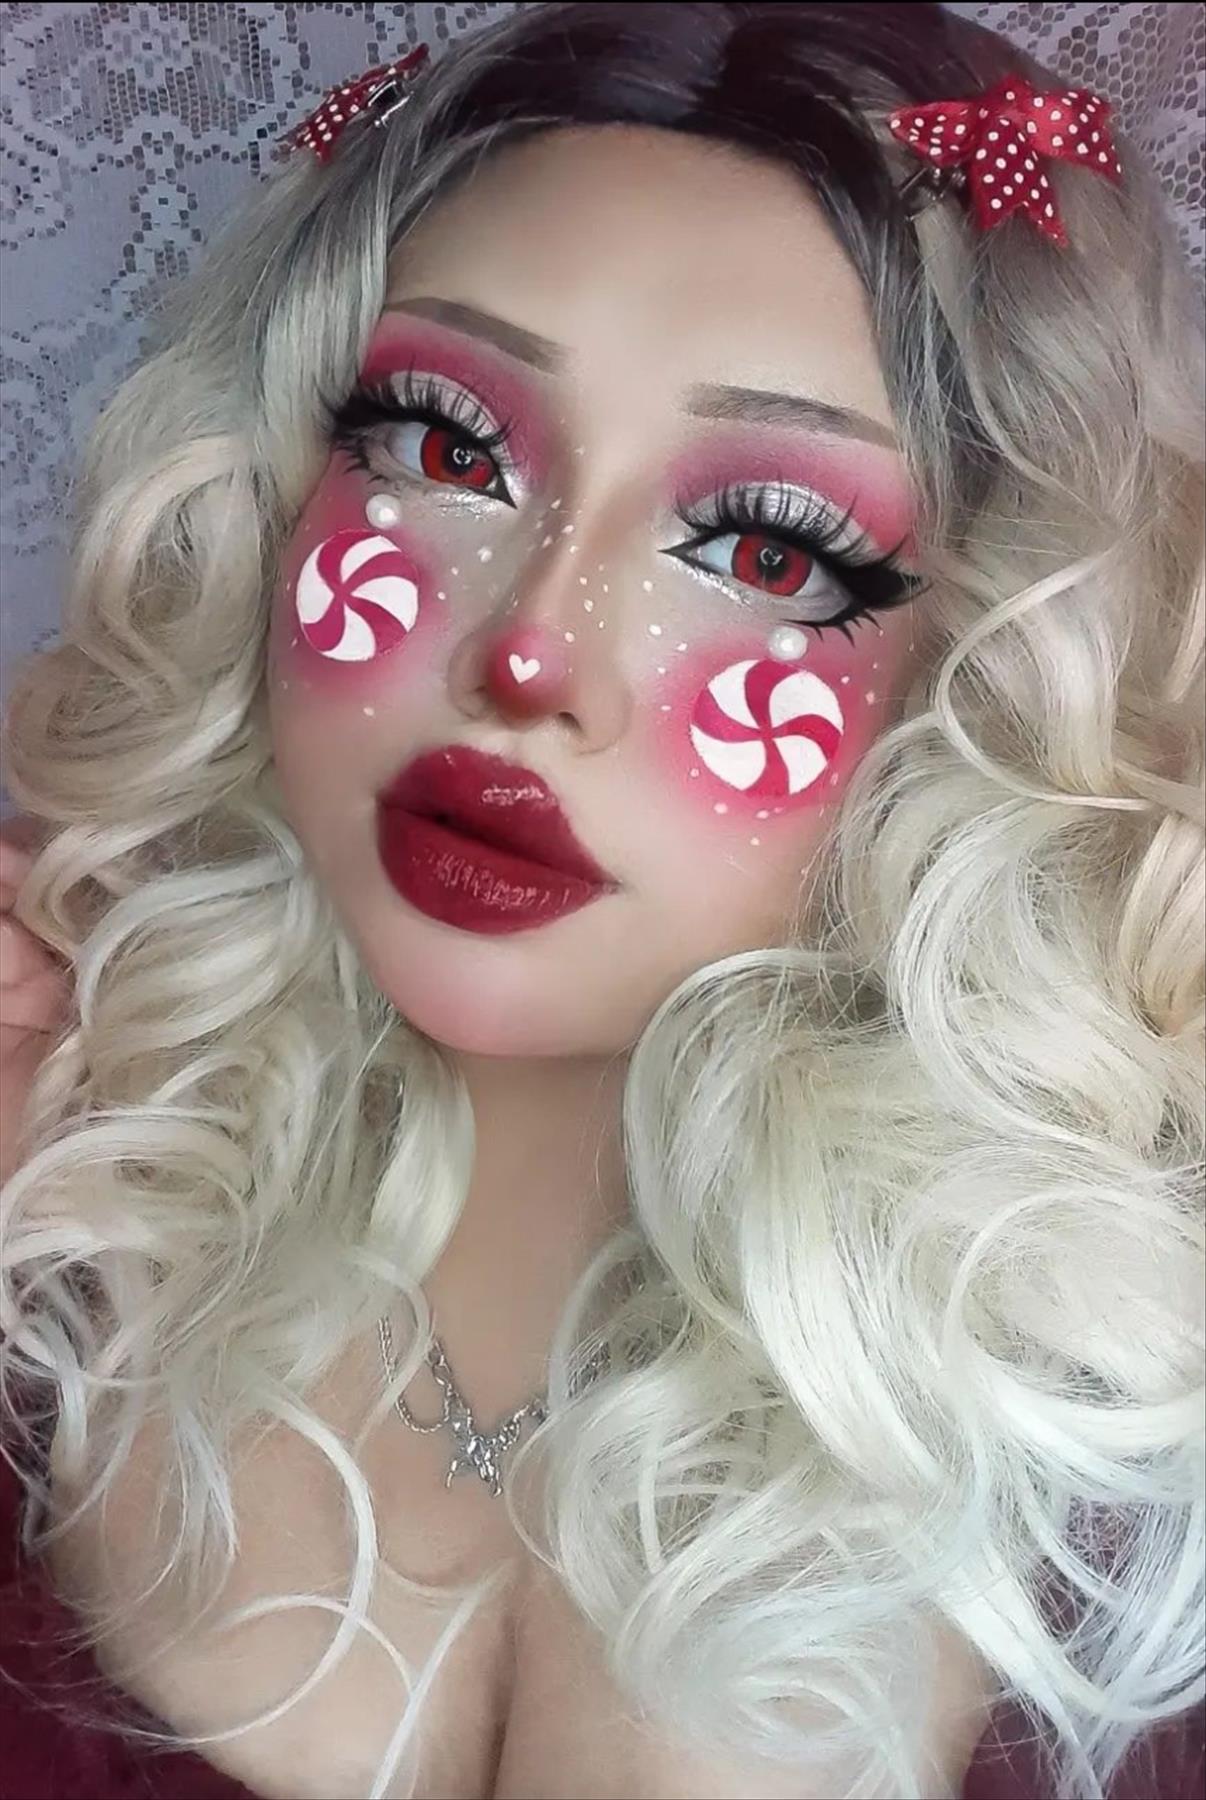 Glam Christmas makeup looks and festival makeup ideas